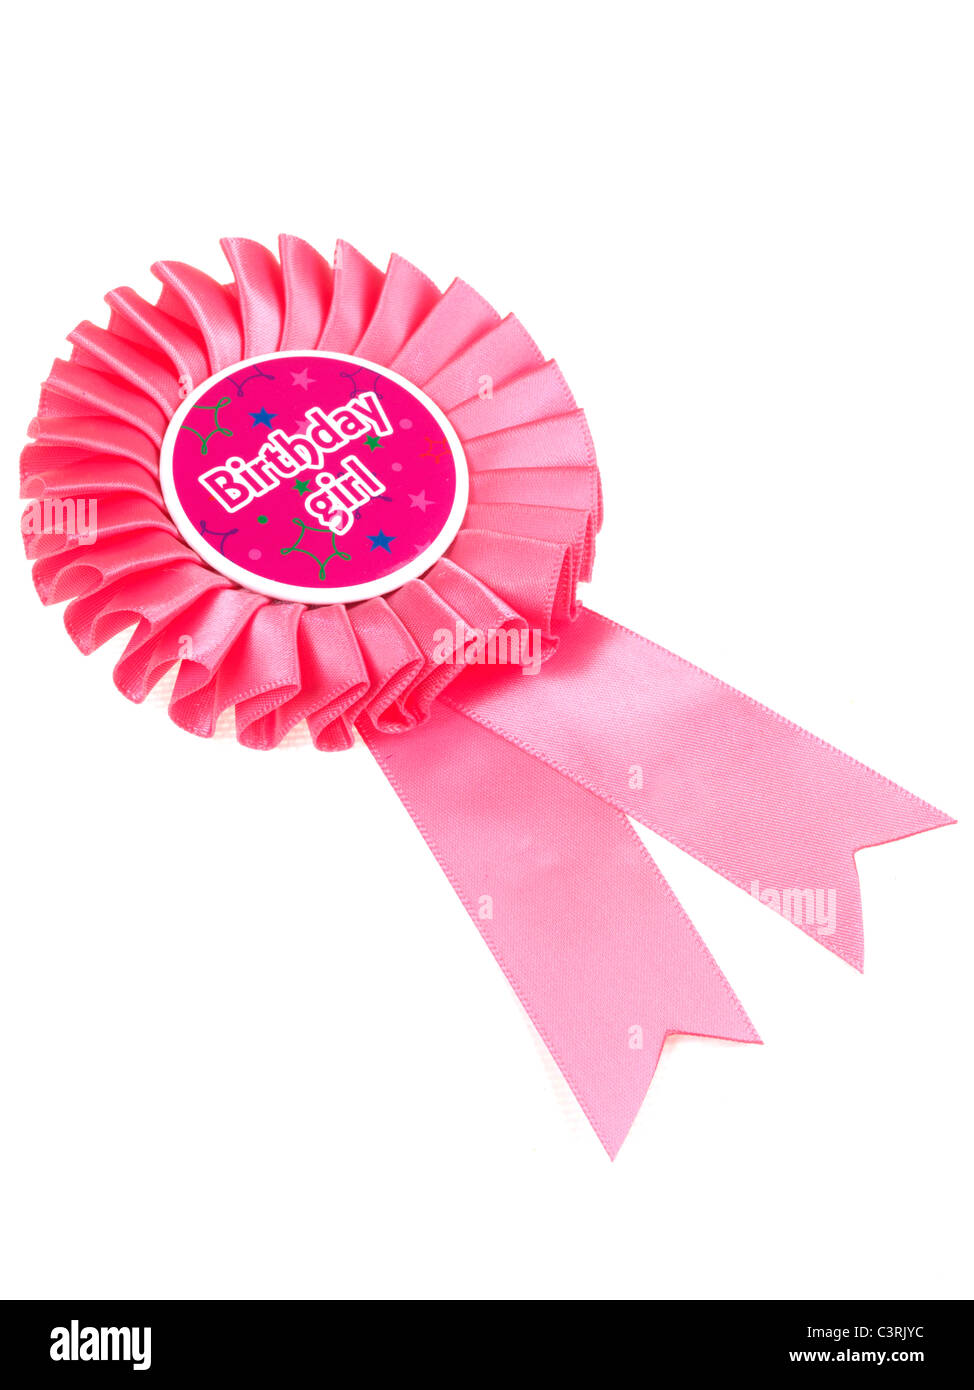 ITS MY BIRTHDAY 10 20 30 40 50 TODAY PERSONALISED AGE ROSETTE HAPPY BIRTHDAY 